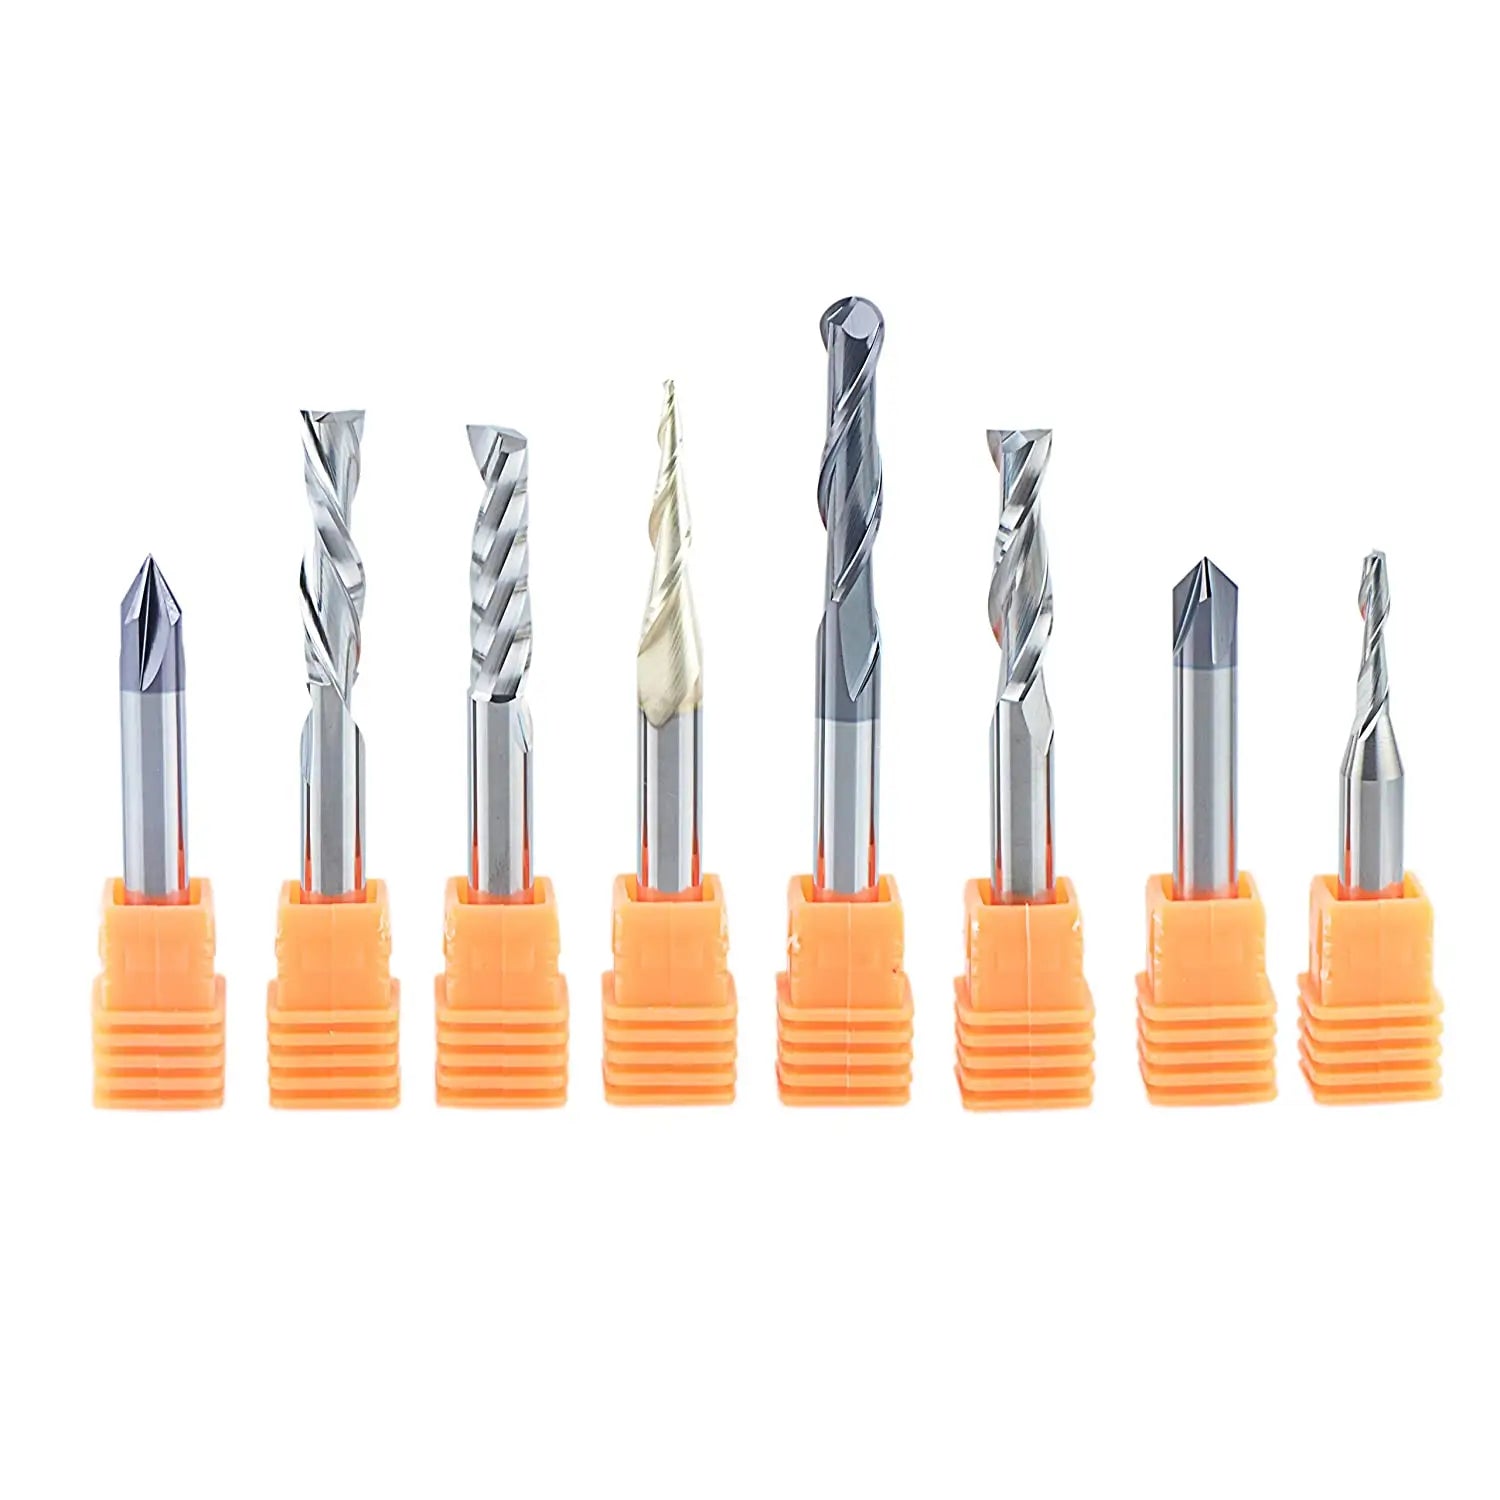 8-Piece In Groove Engraving Tool Body & Knives